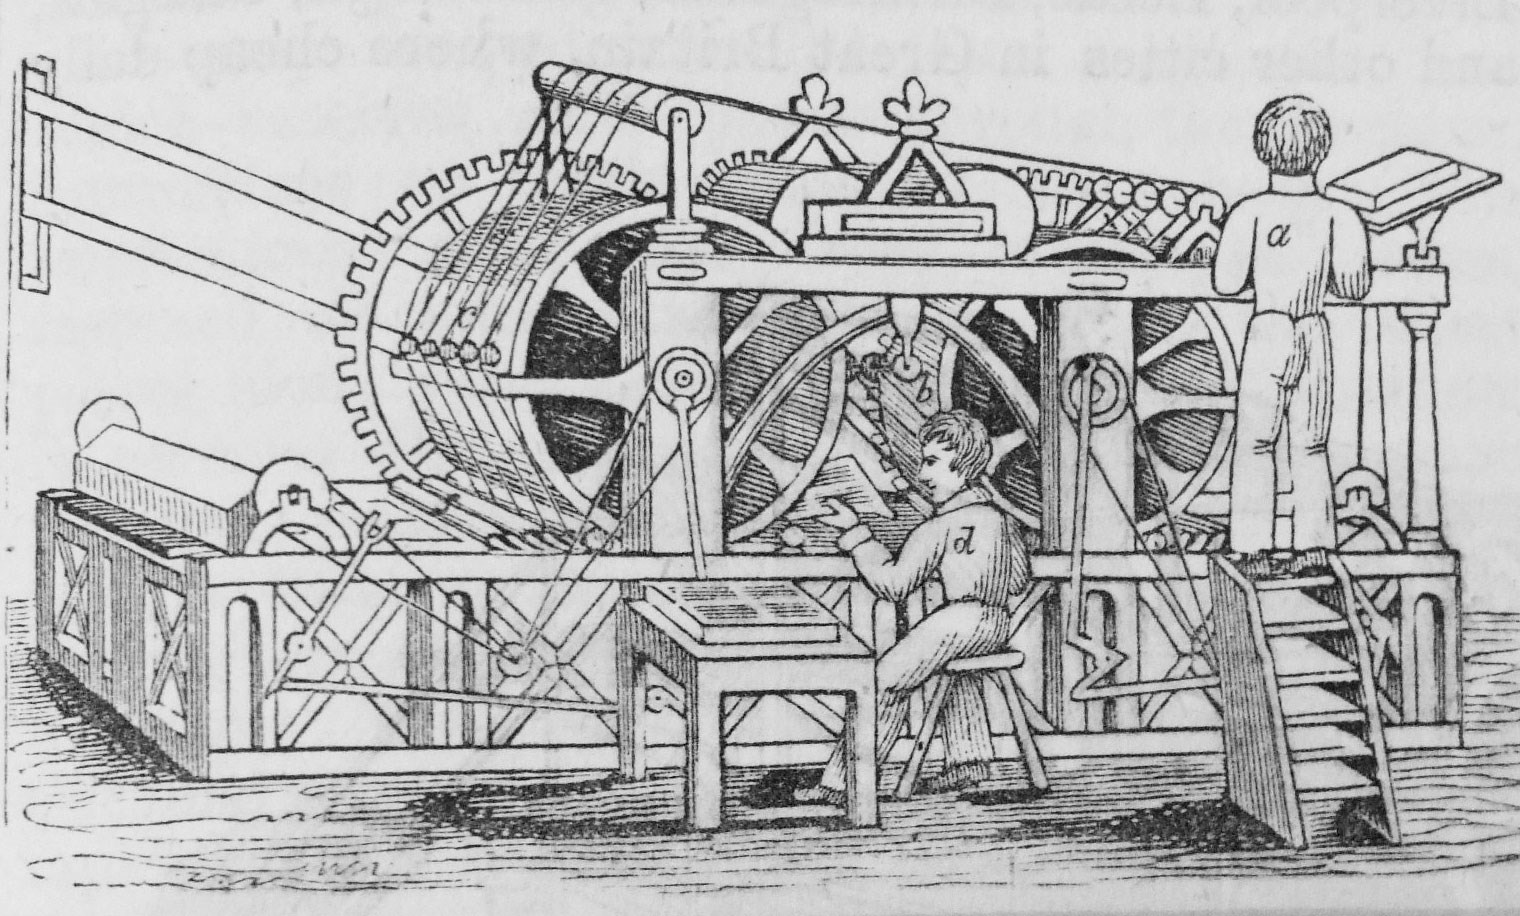 Applegath and Cowper book machine illustrated in Chambers's Encyclopaedia, 1865.